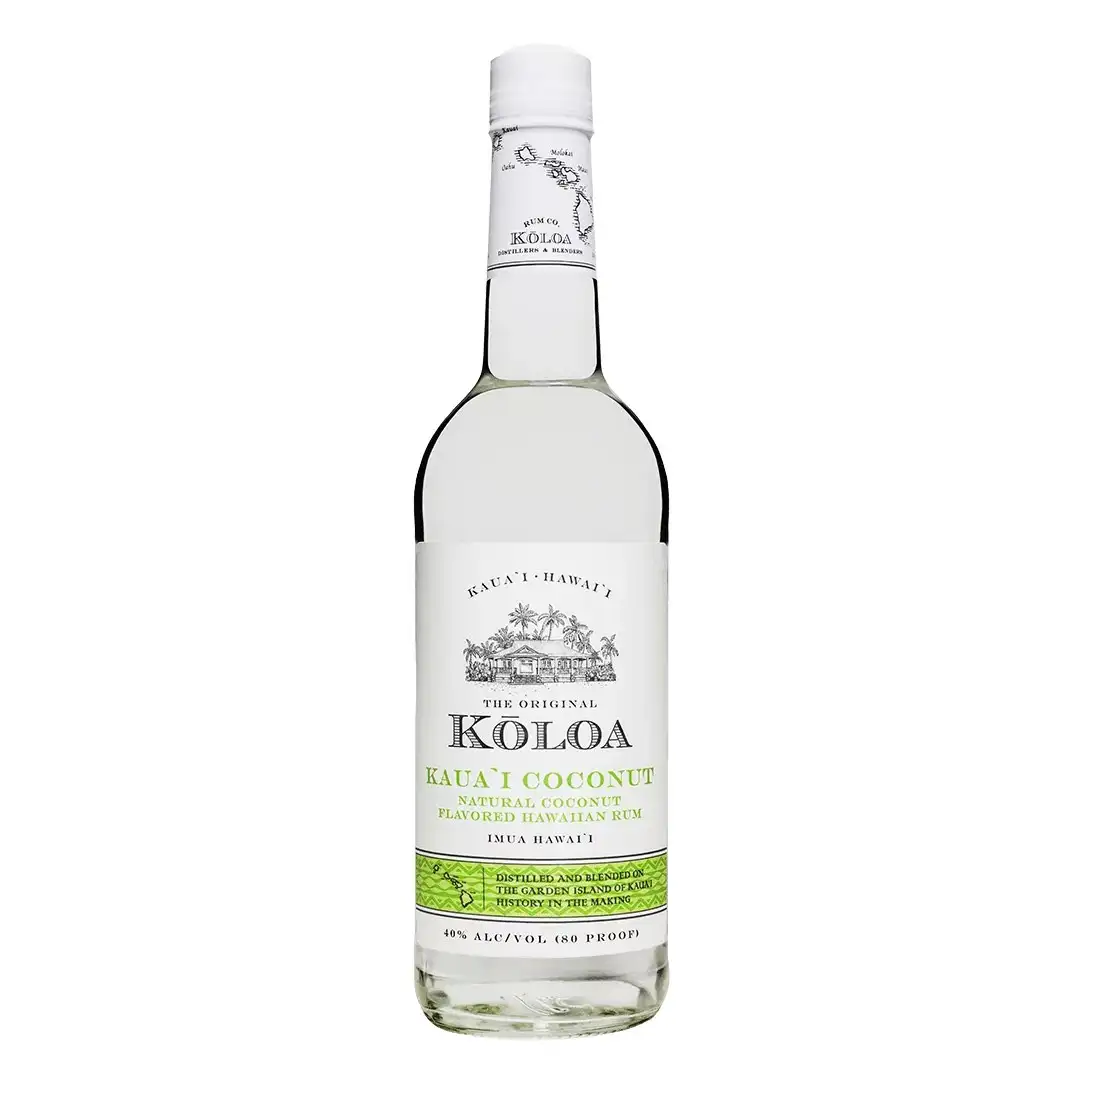 Image of the front of the bottle of the rum Koloa Kaua‘i Coconut